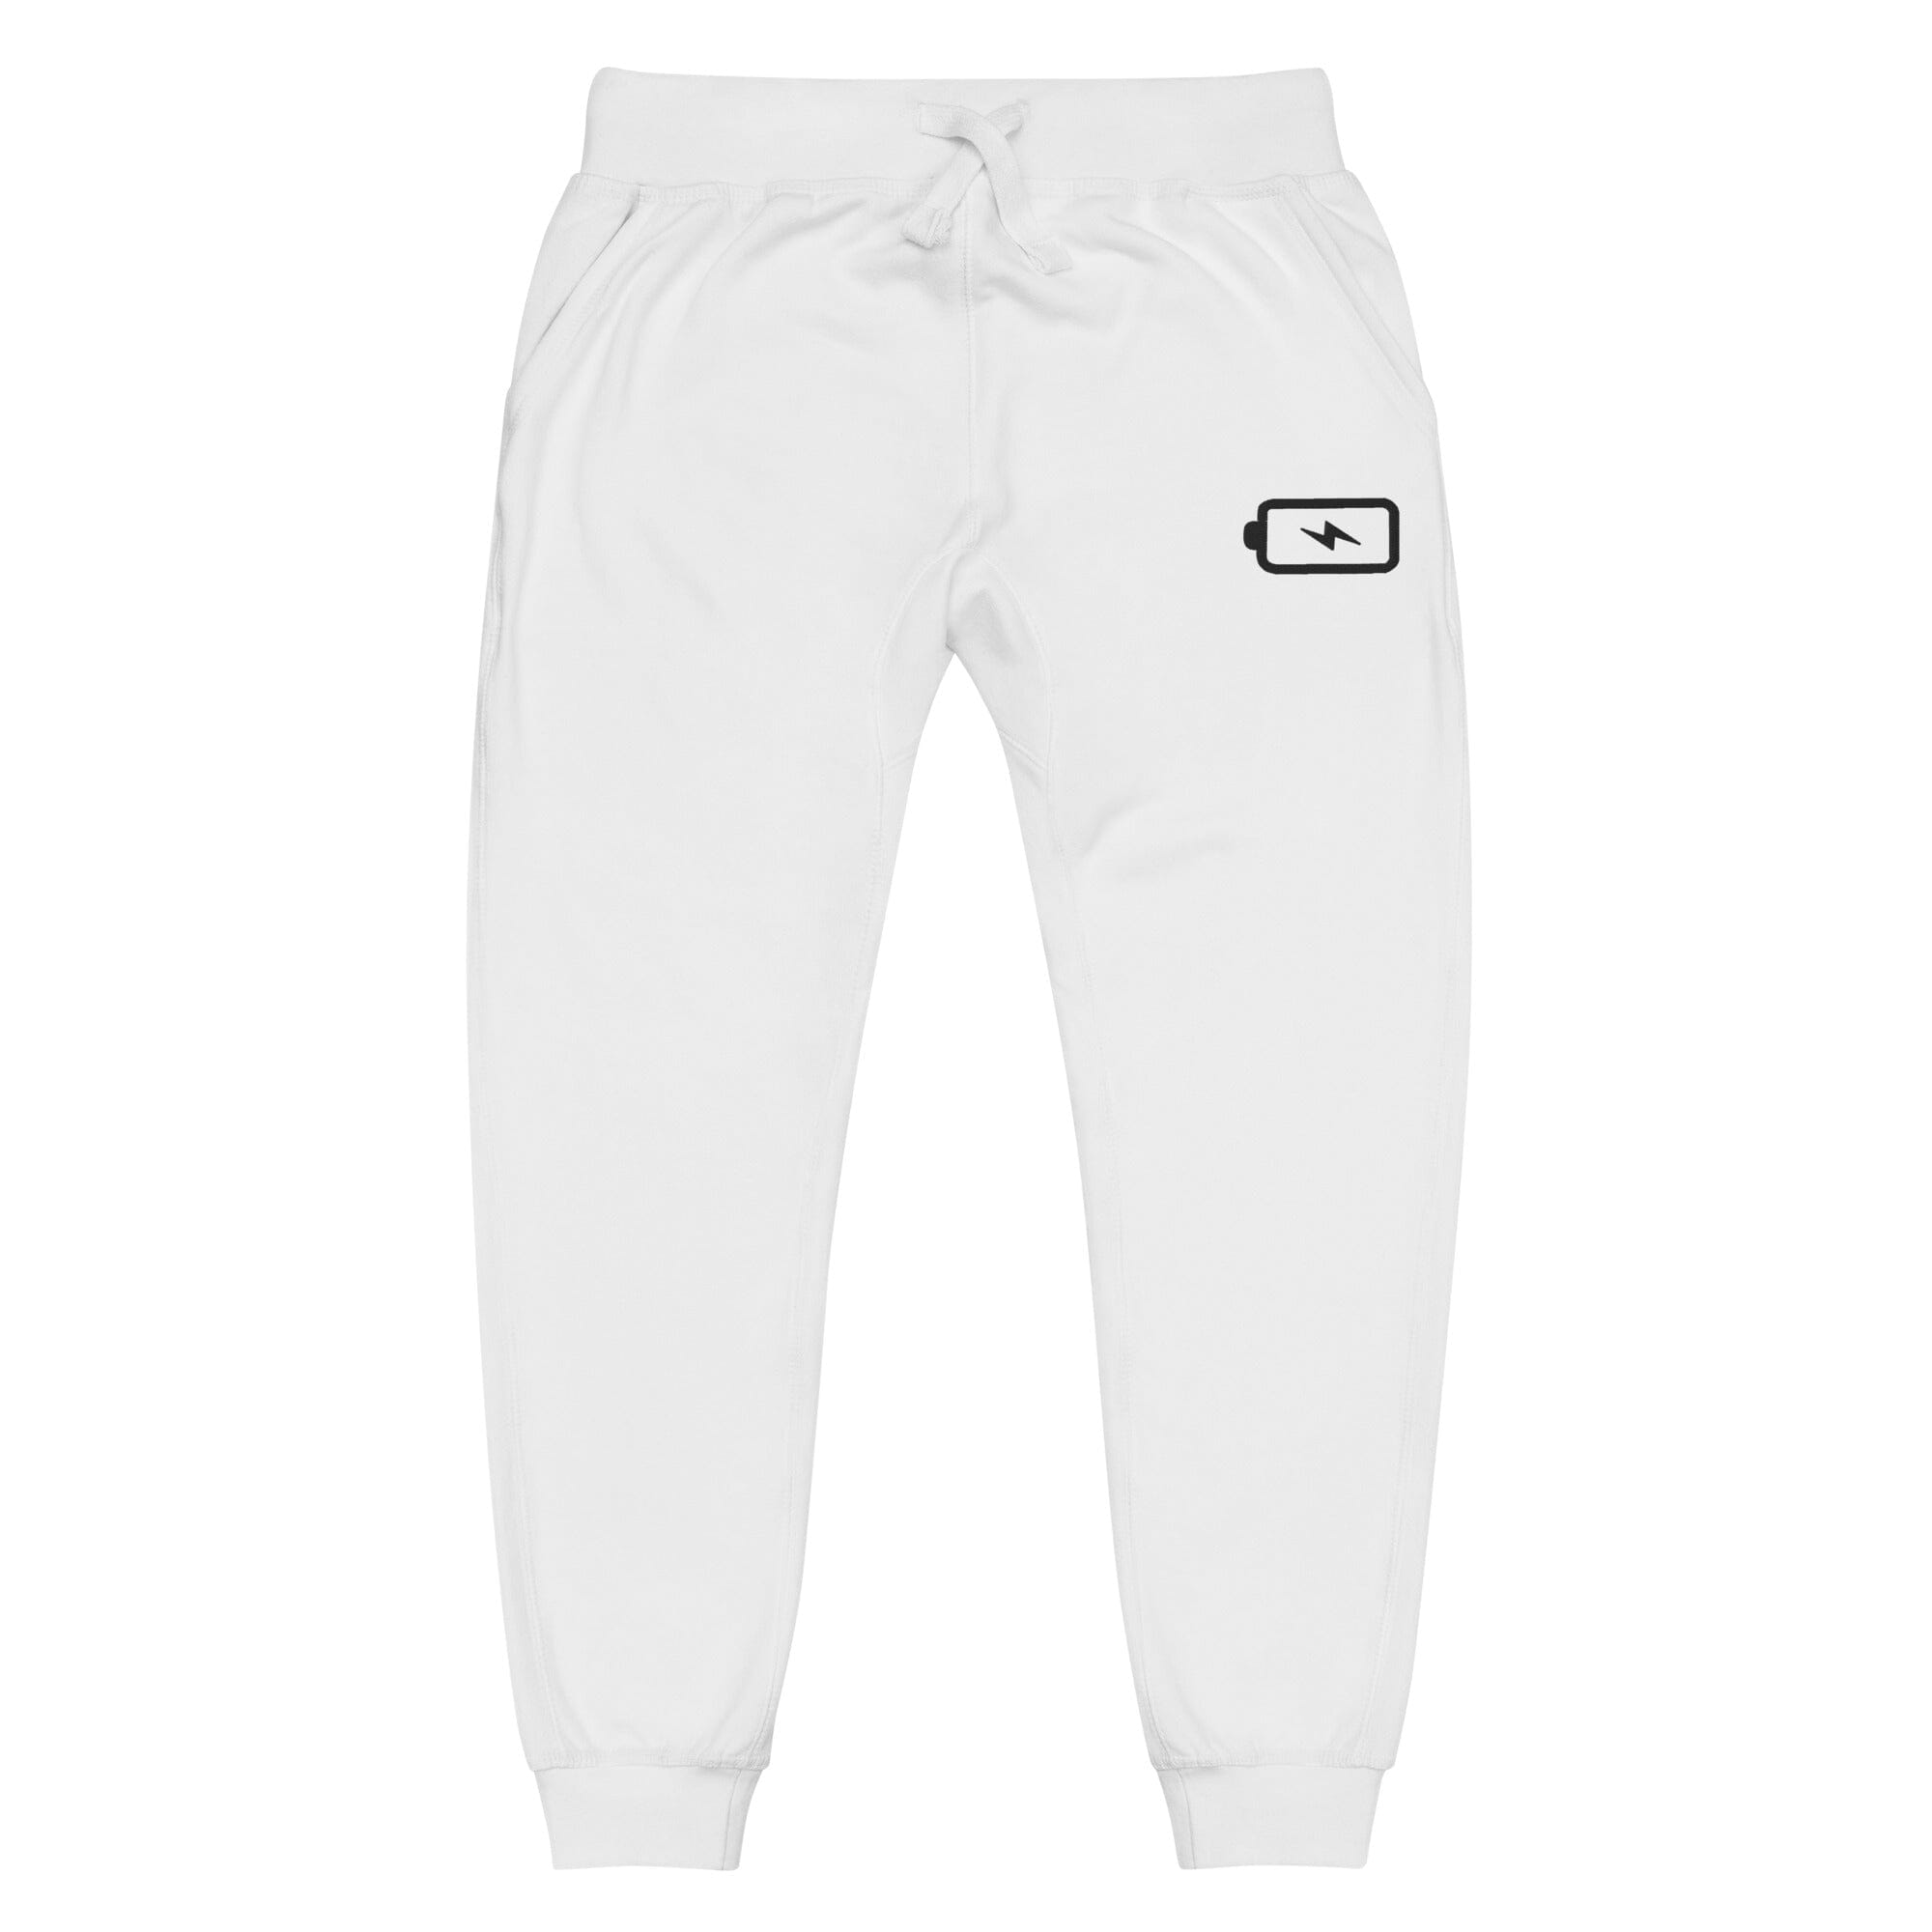 Battery Recharge | Unisex fleece sweatpants | Gamer Affirmations Threads & Thistles Inventory White XS 